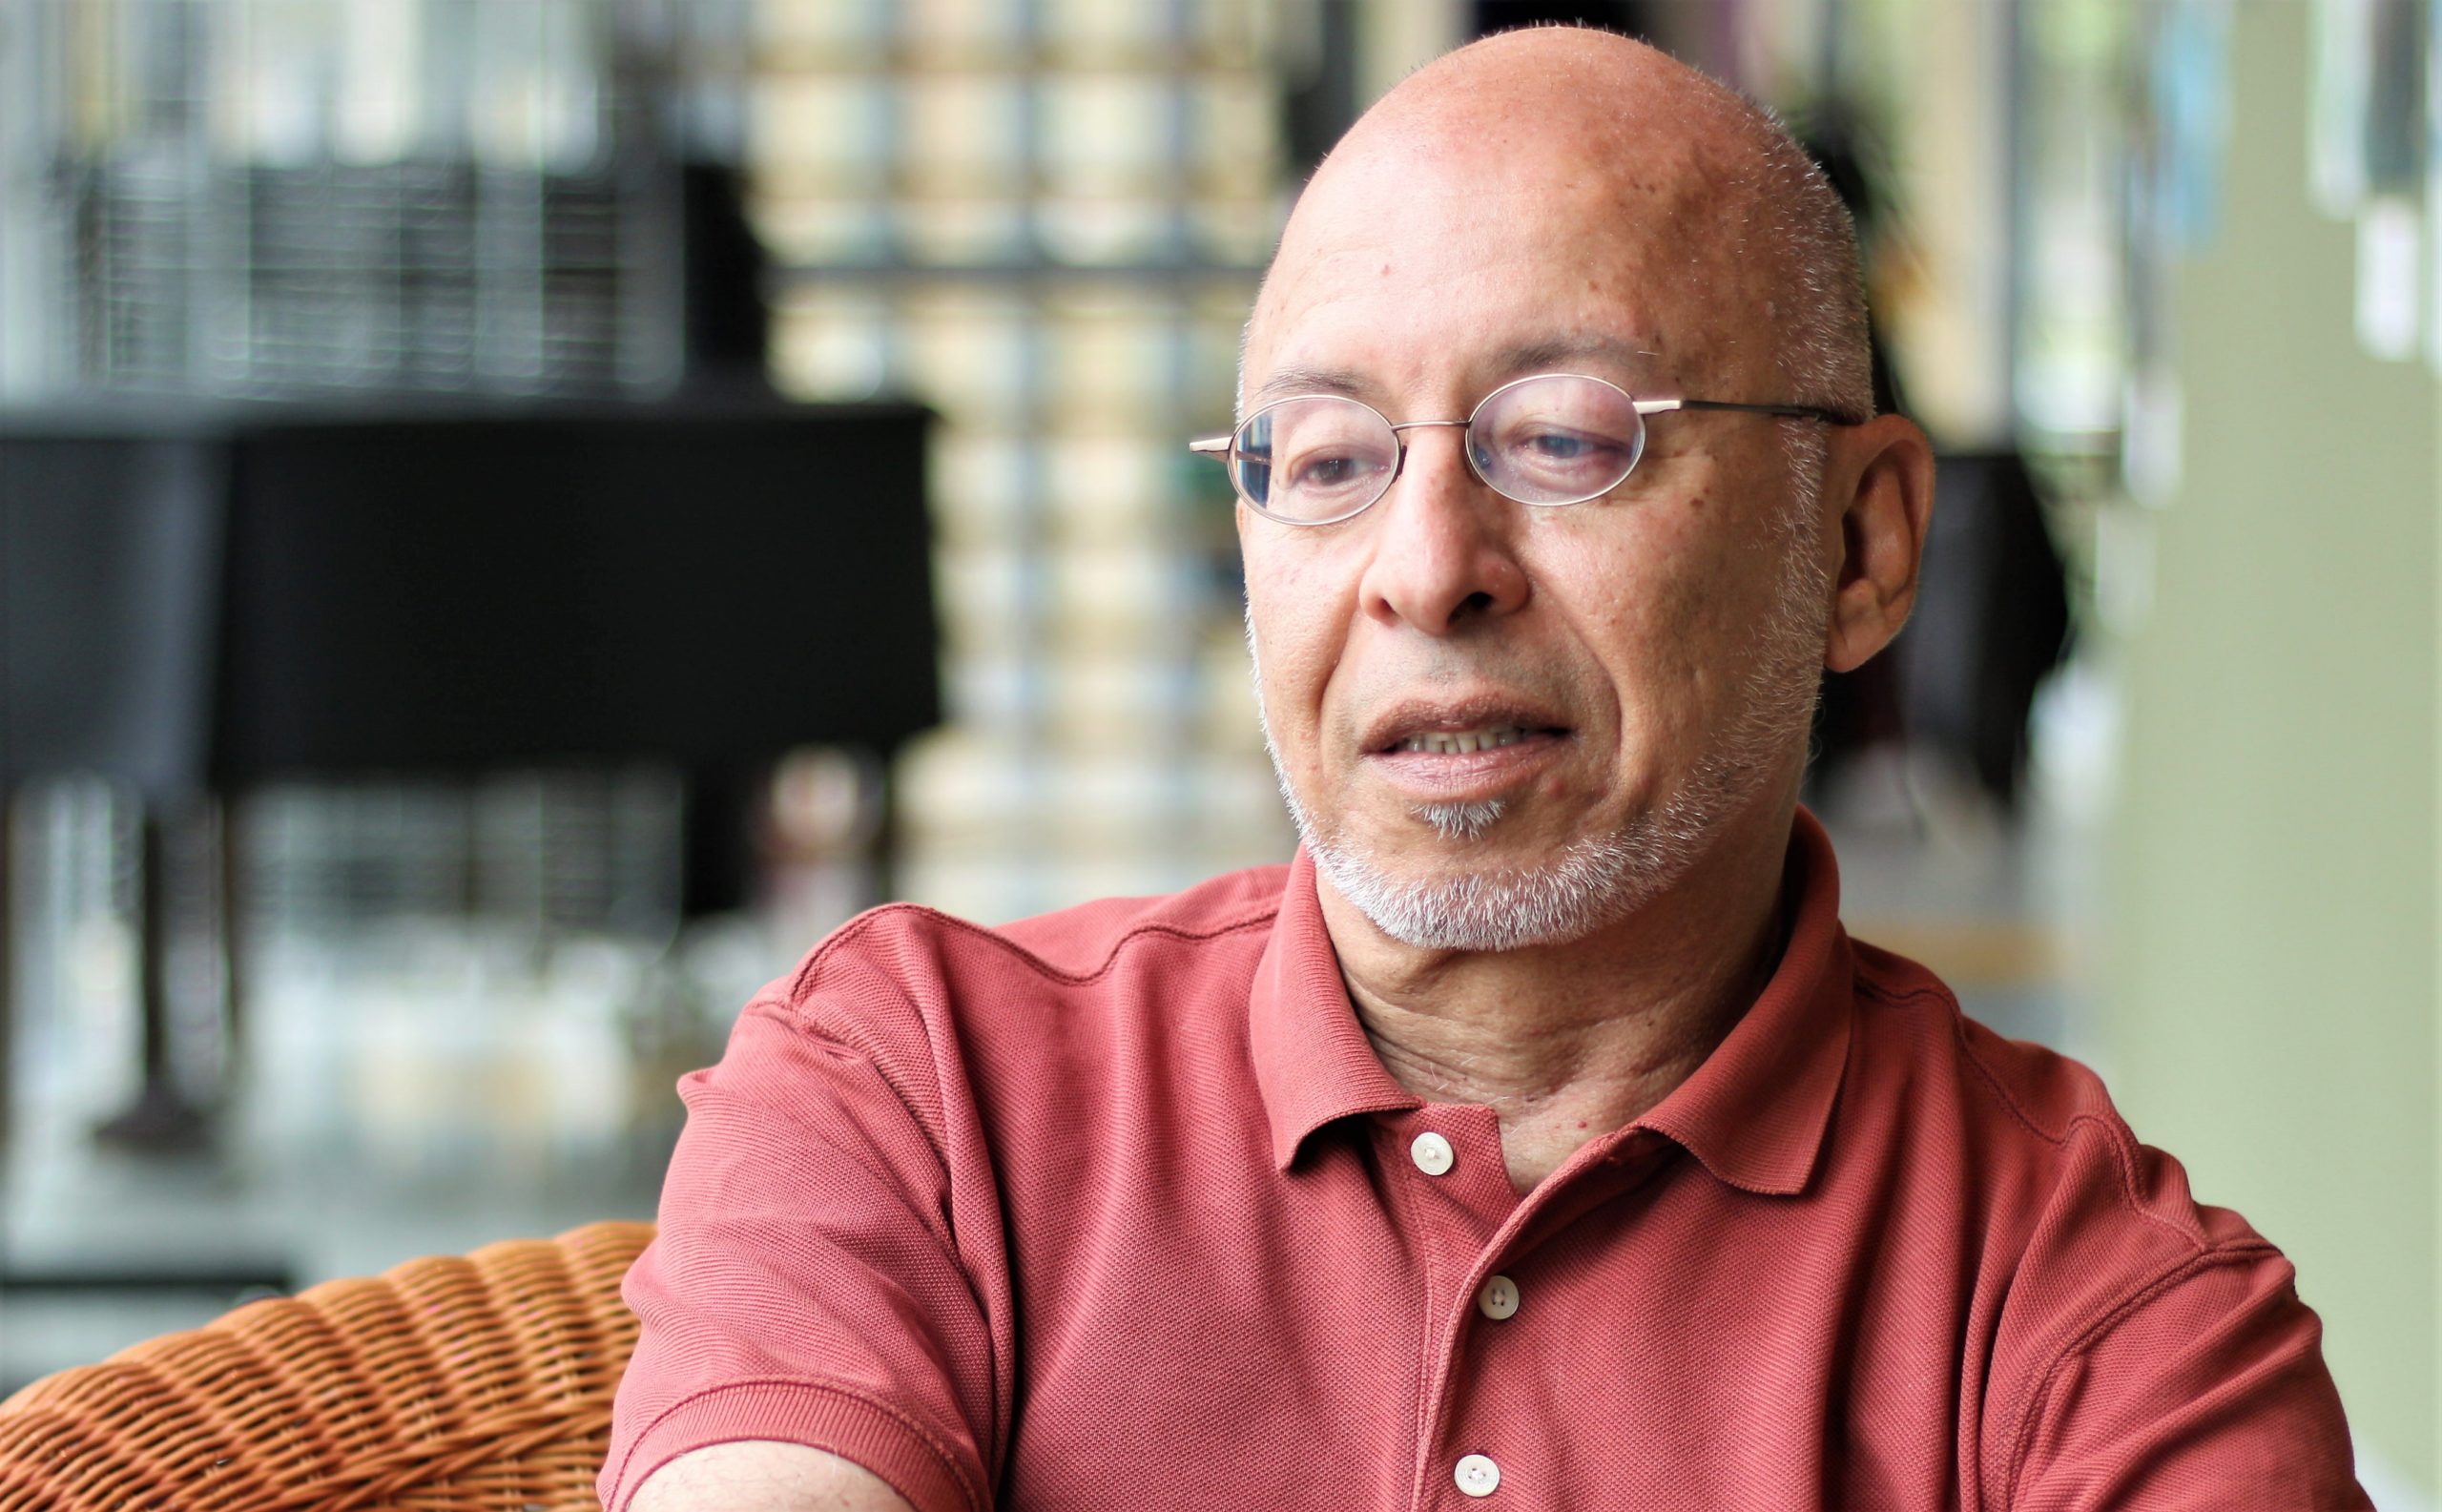 portrait image of filmmaker Andre Reeder, head and shoulders wearing a pink shirt. Middle aged Surinamese man with bald head, glasses and a grey beard